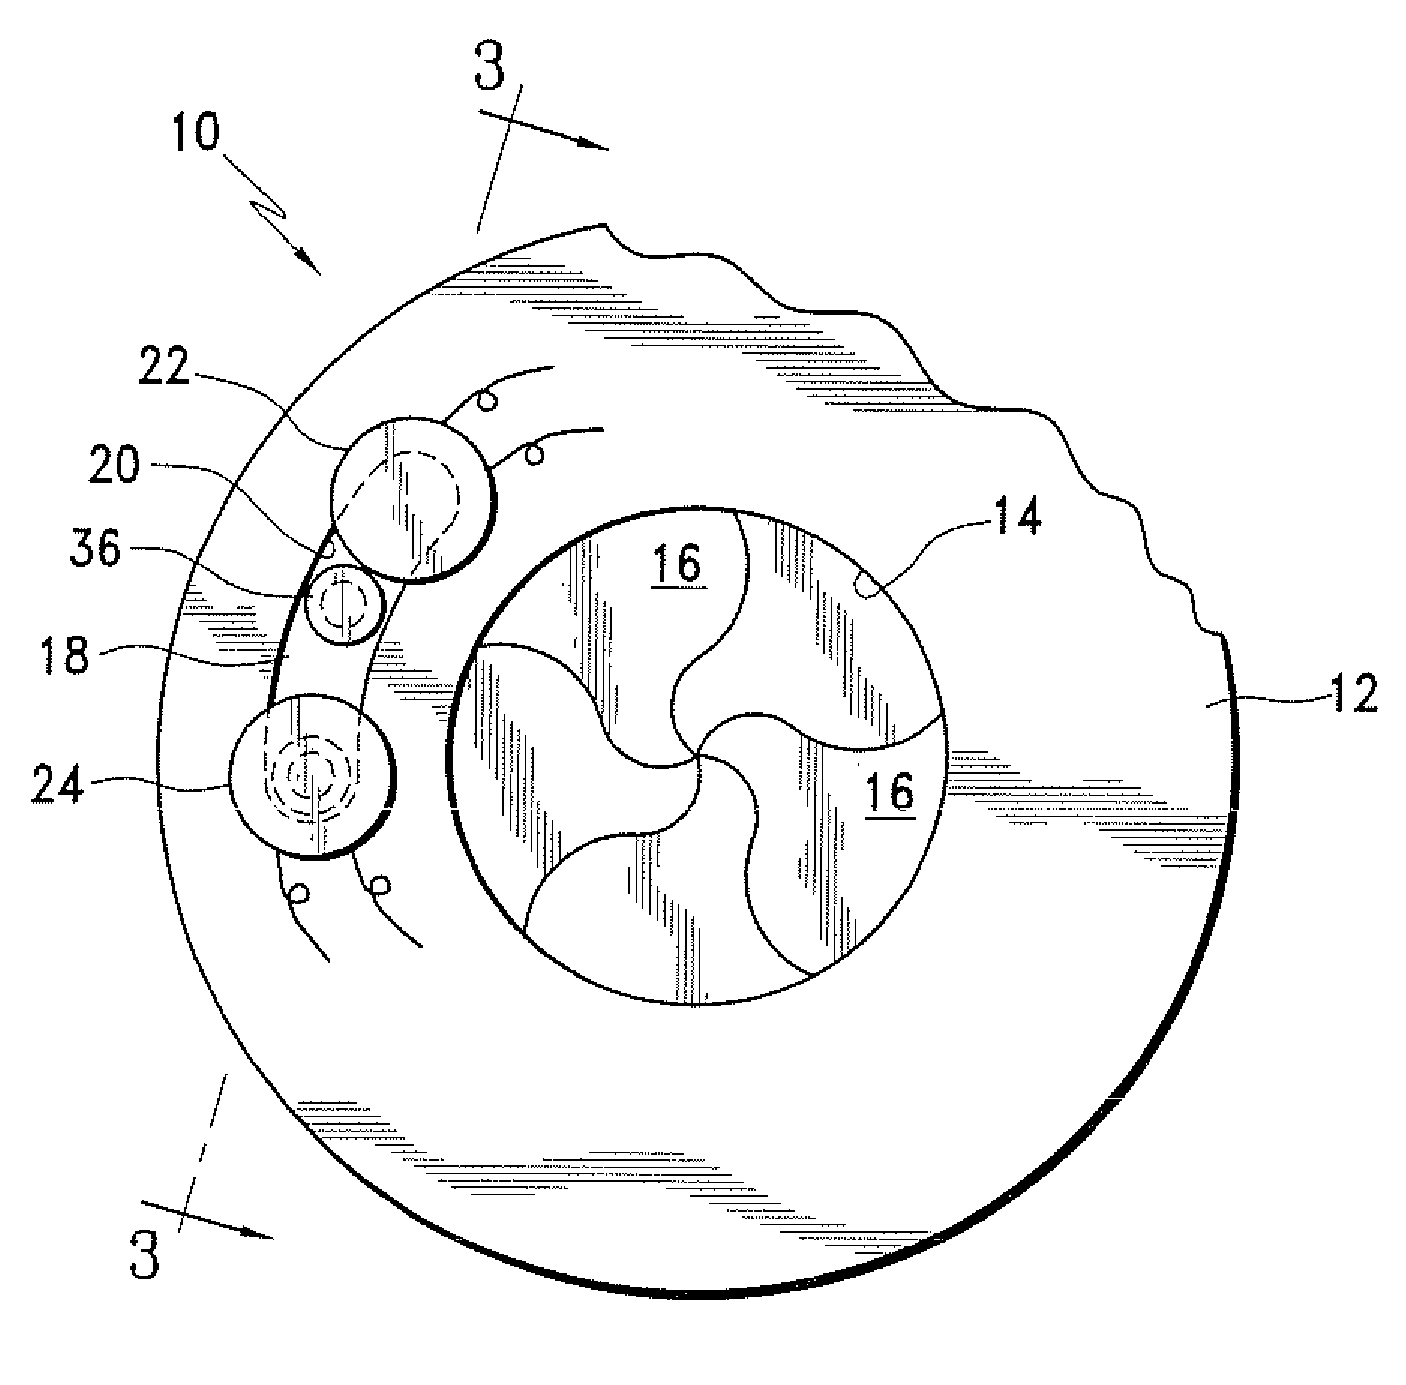 Non-contact shutter activation system and method